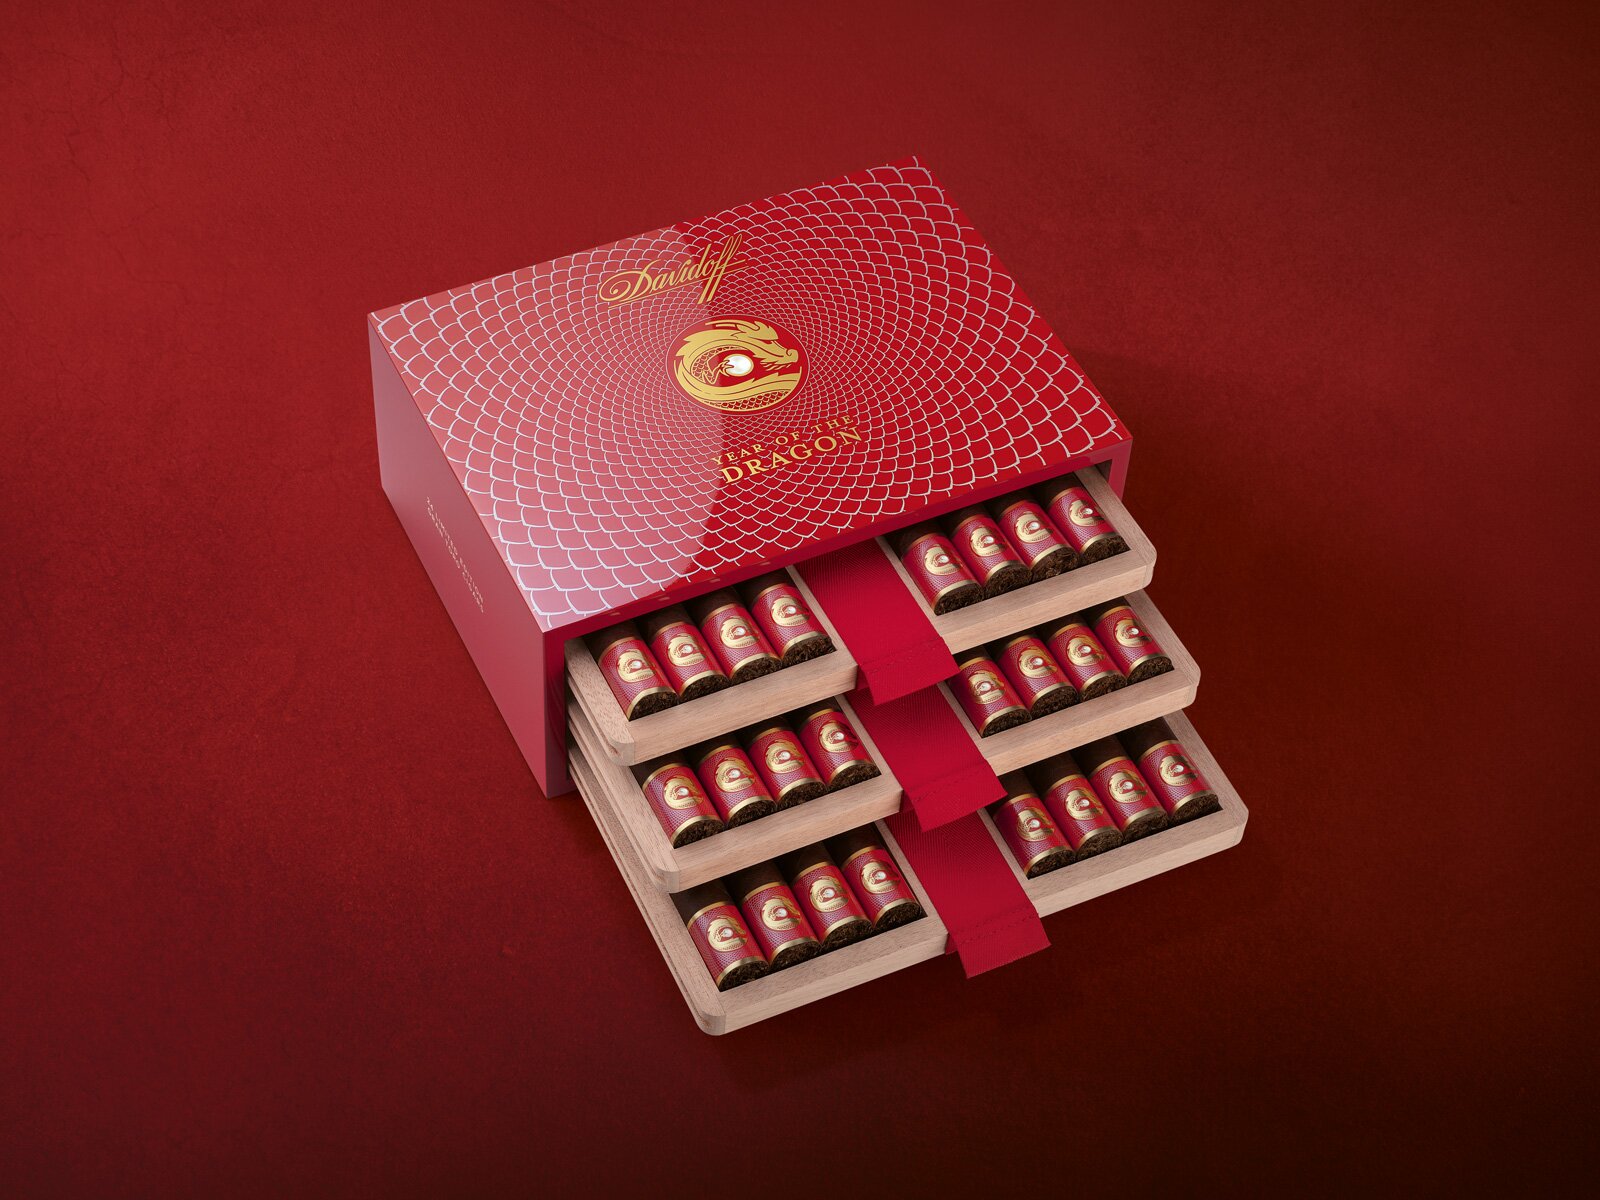 The Davidoff Year of the Dragon Flagship Exclusive Gran Toro cigars in their opened box.